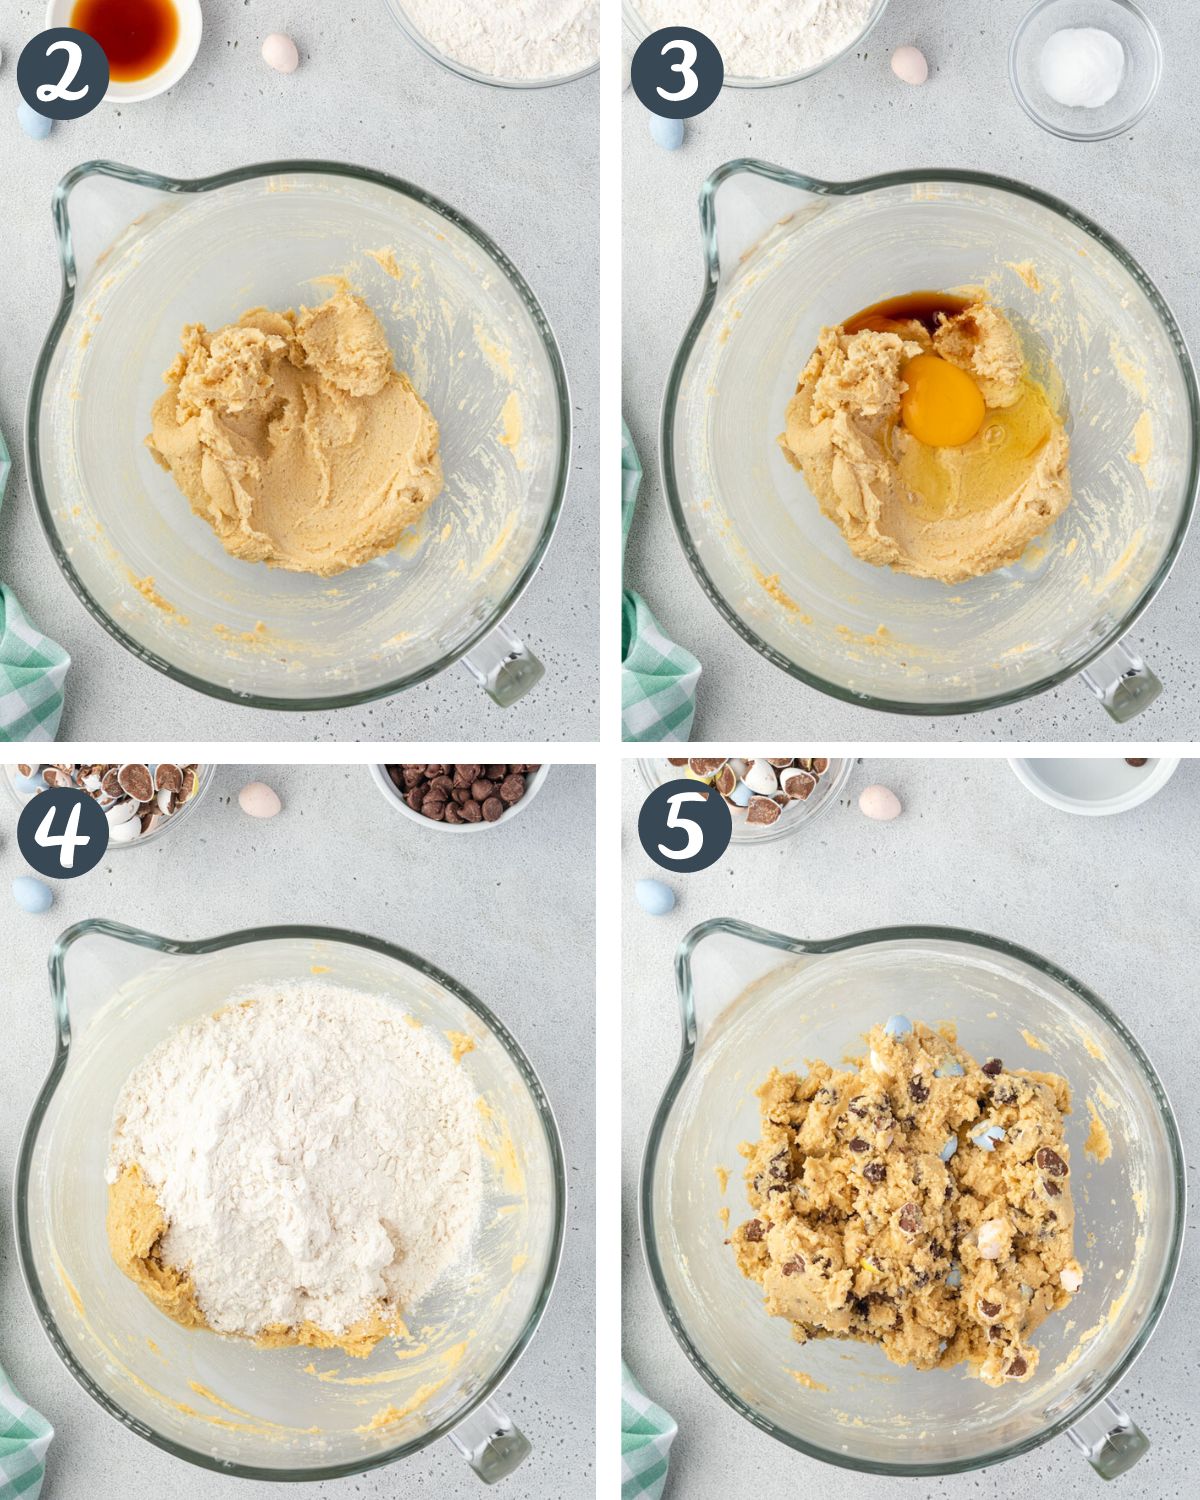 4 images showing steps of making cookie dough - sugar creamed, eggs, flour, and finished dough.